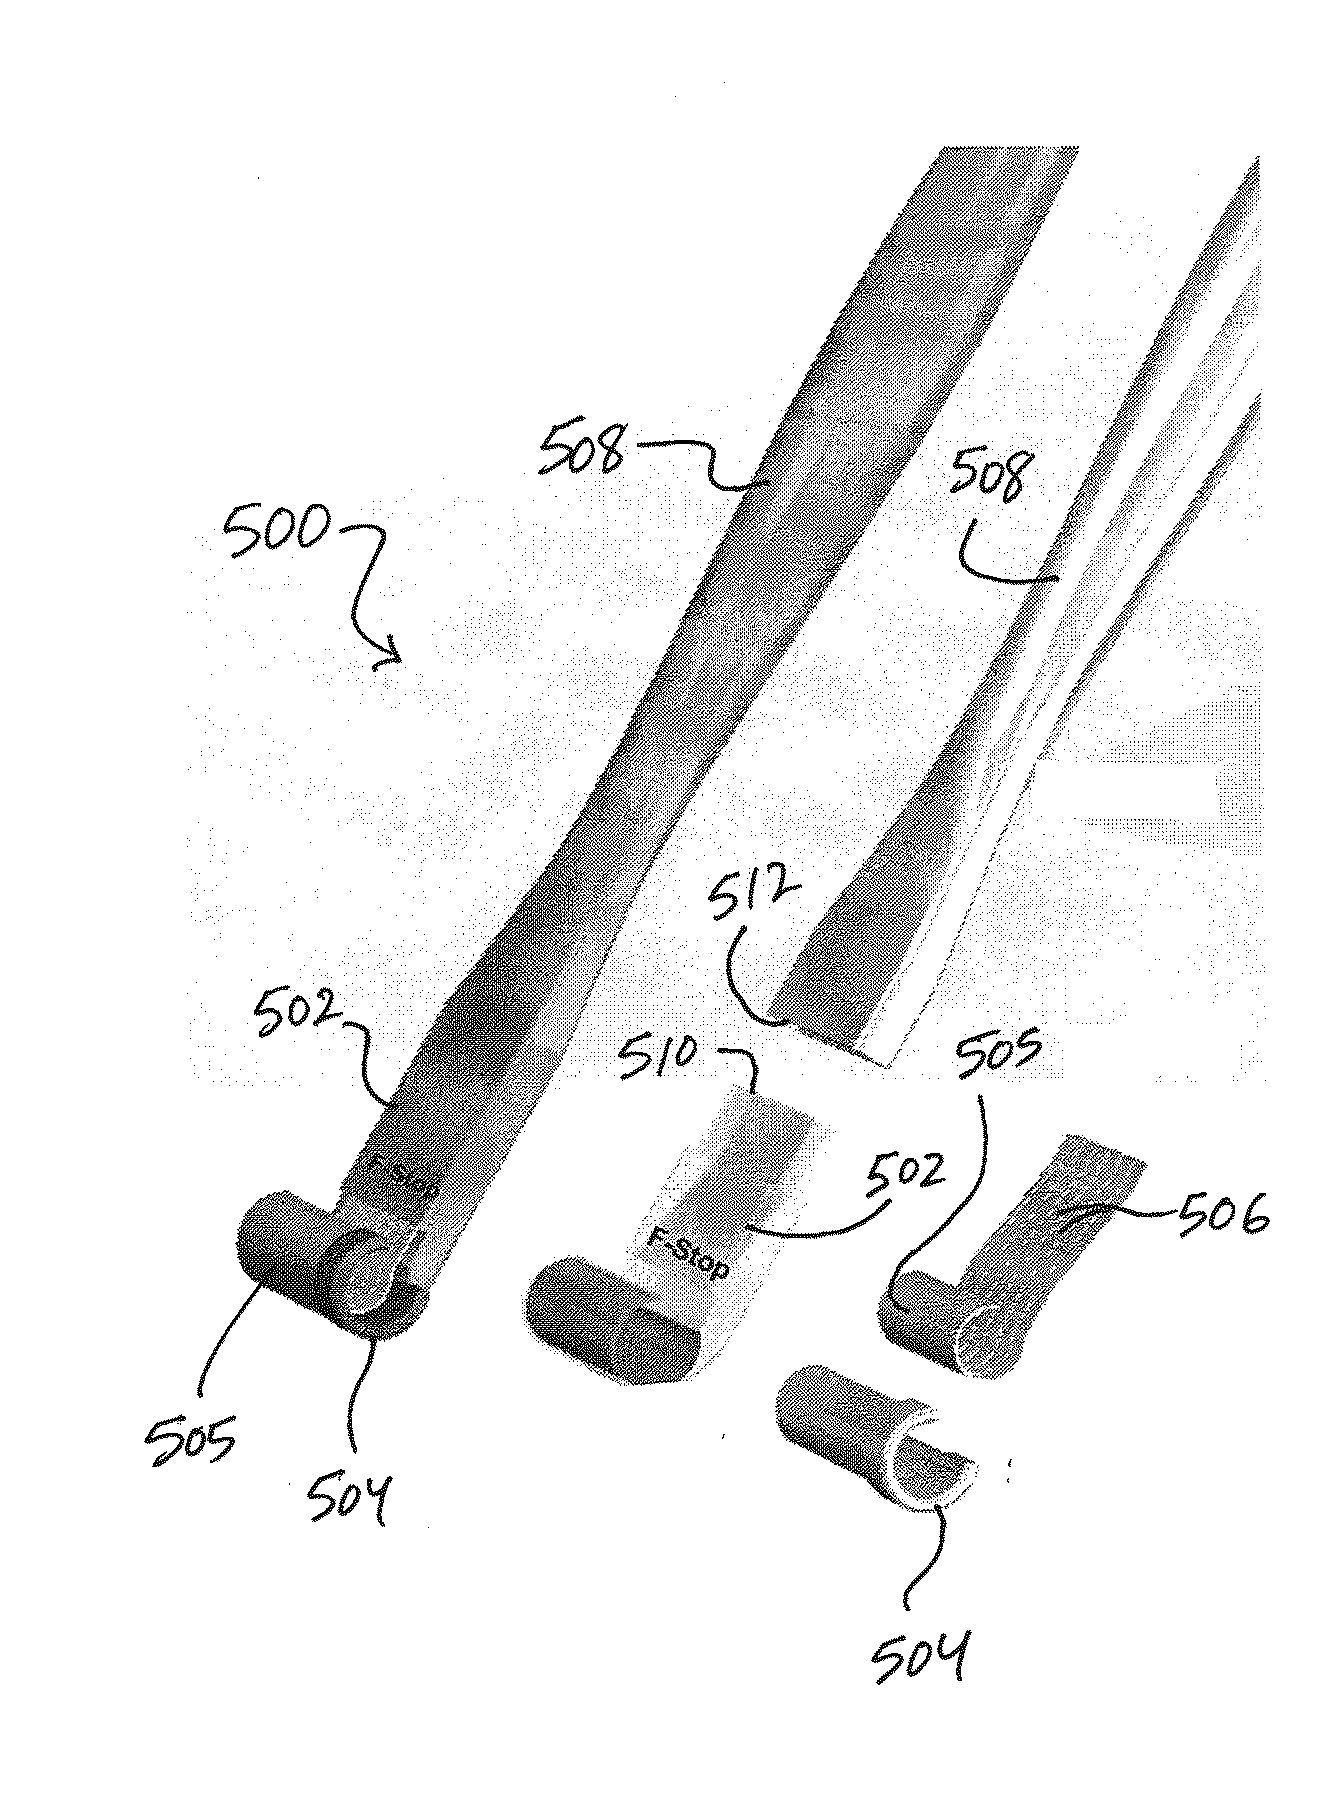 Perivascular Electroporation Device and Method for Extending Vascular Patency